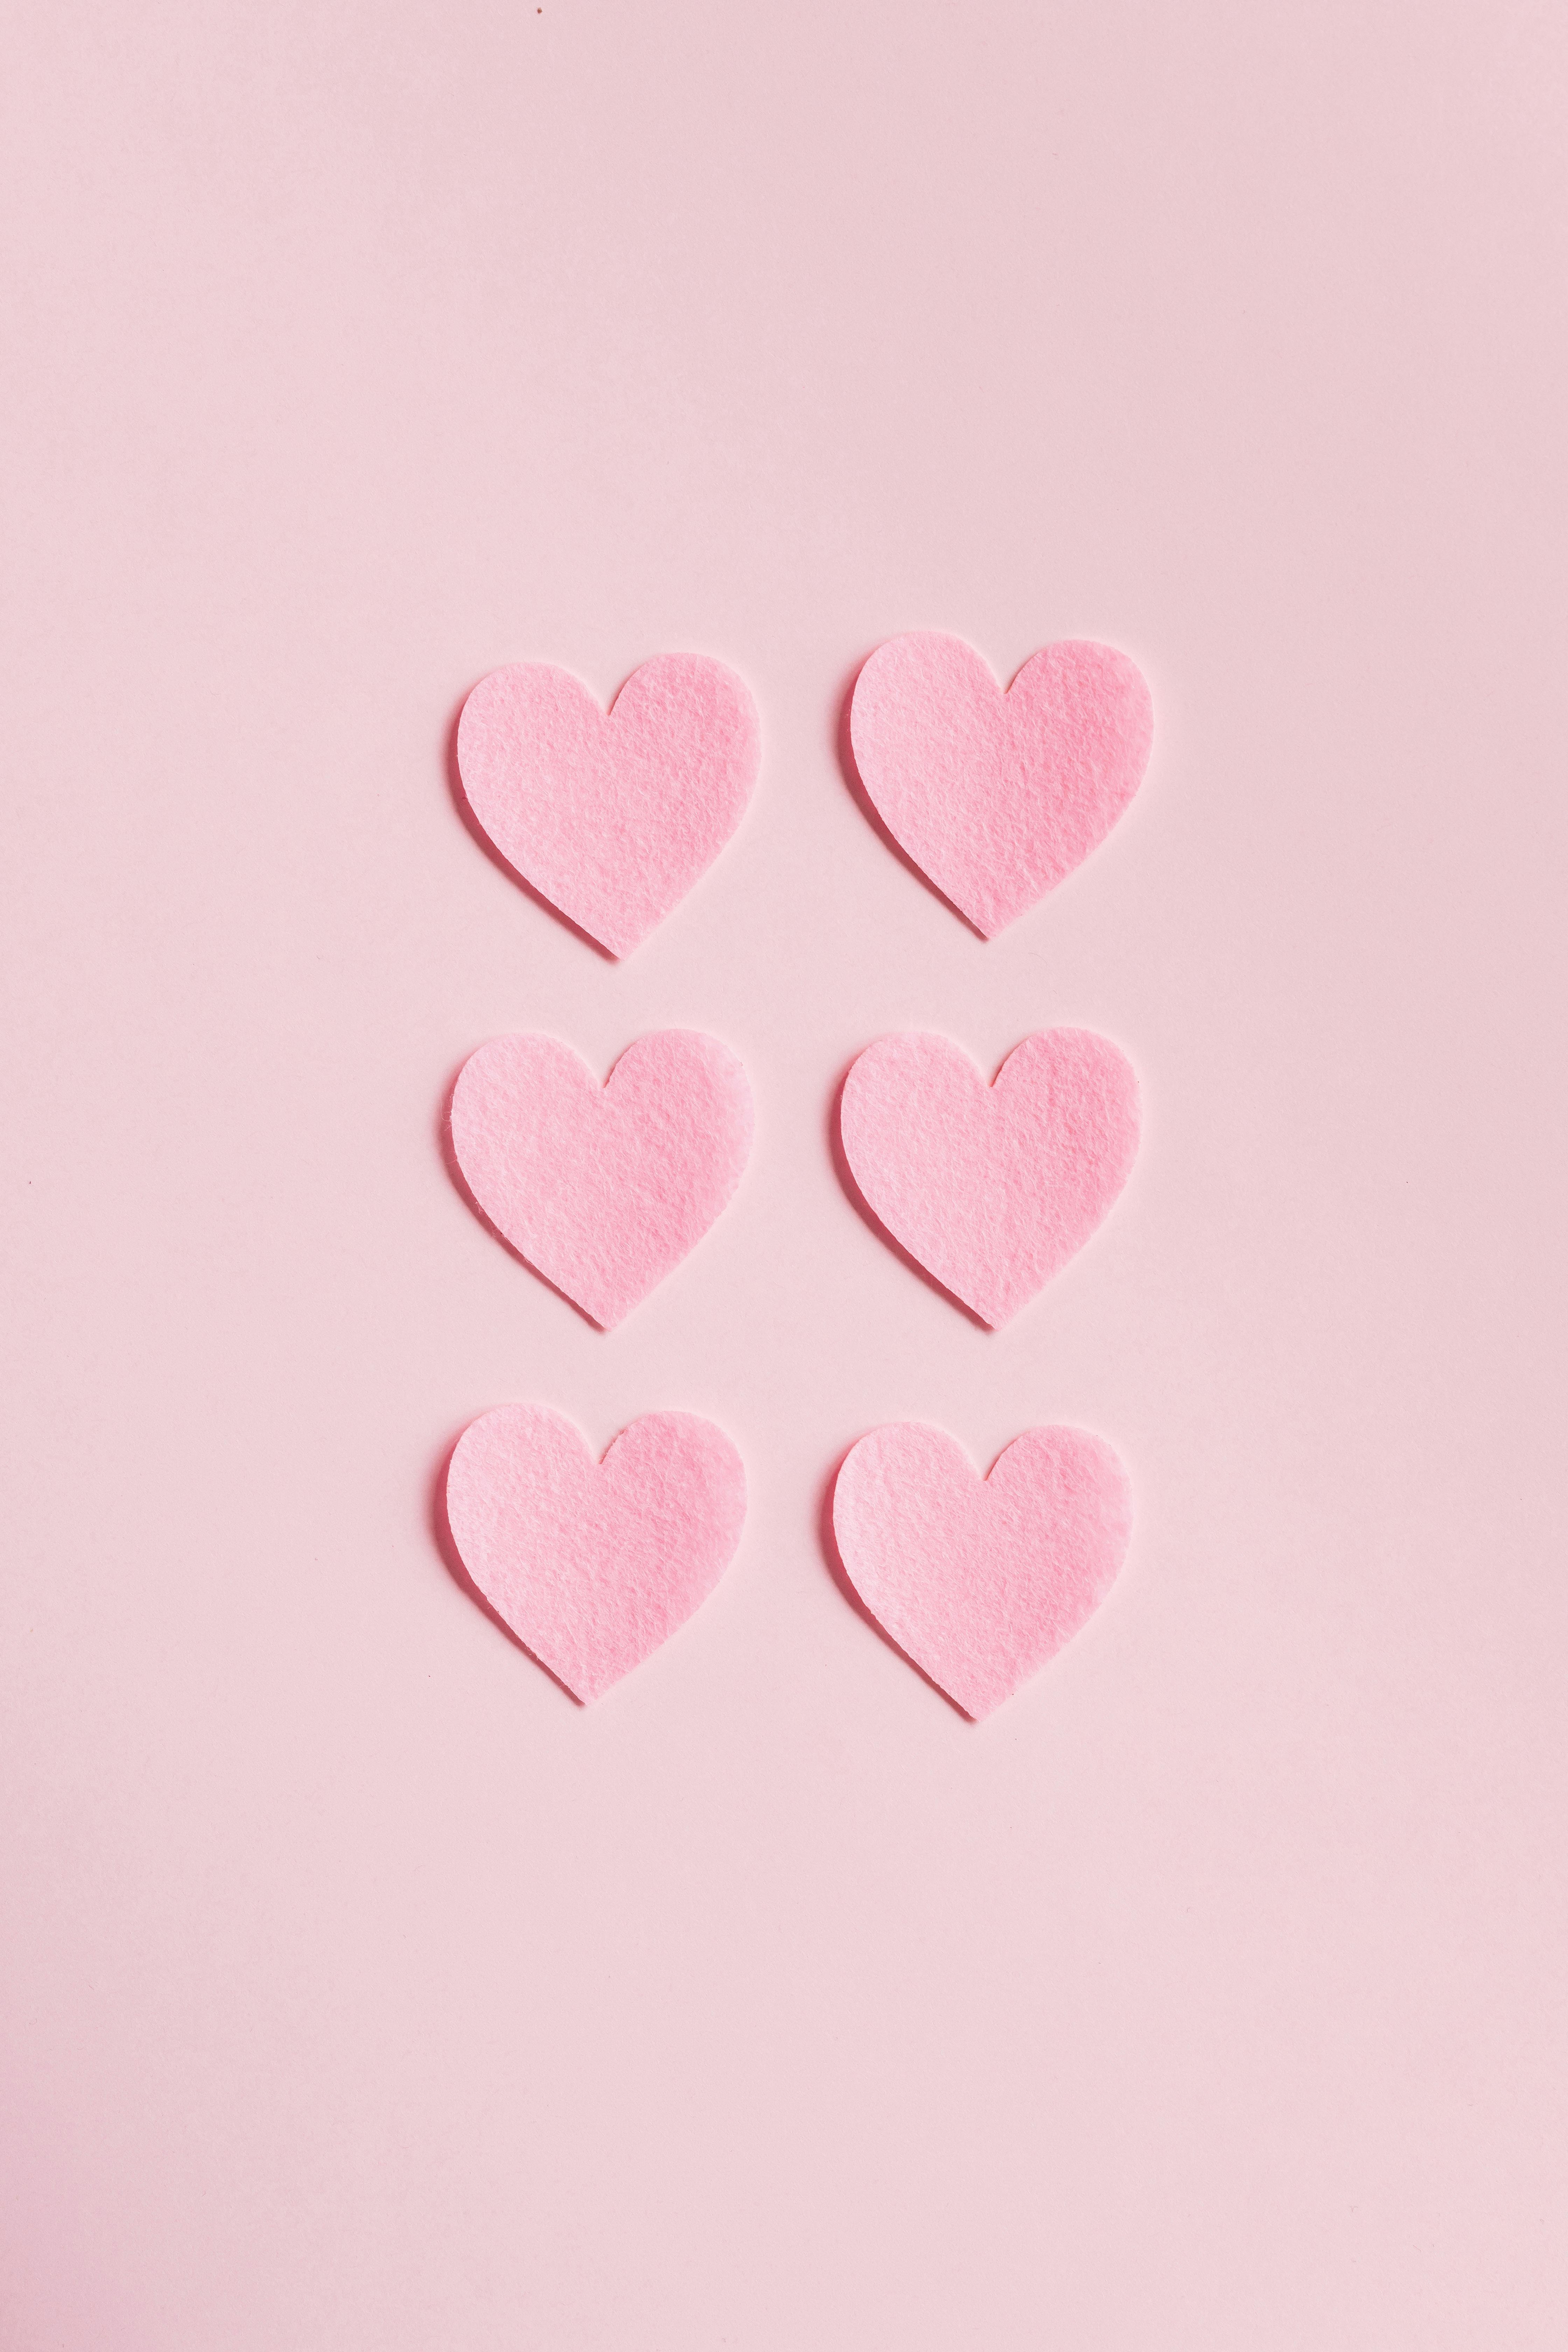 heart shaped cutouts on pink background